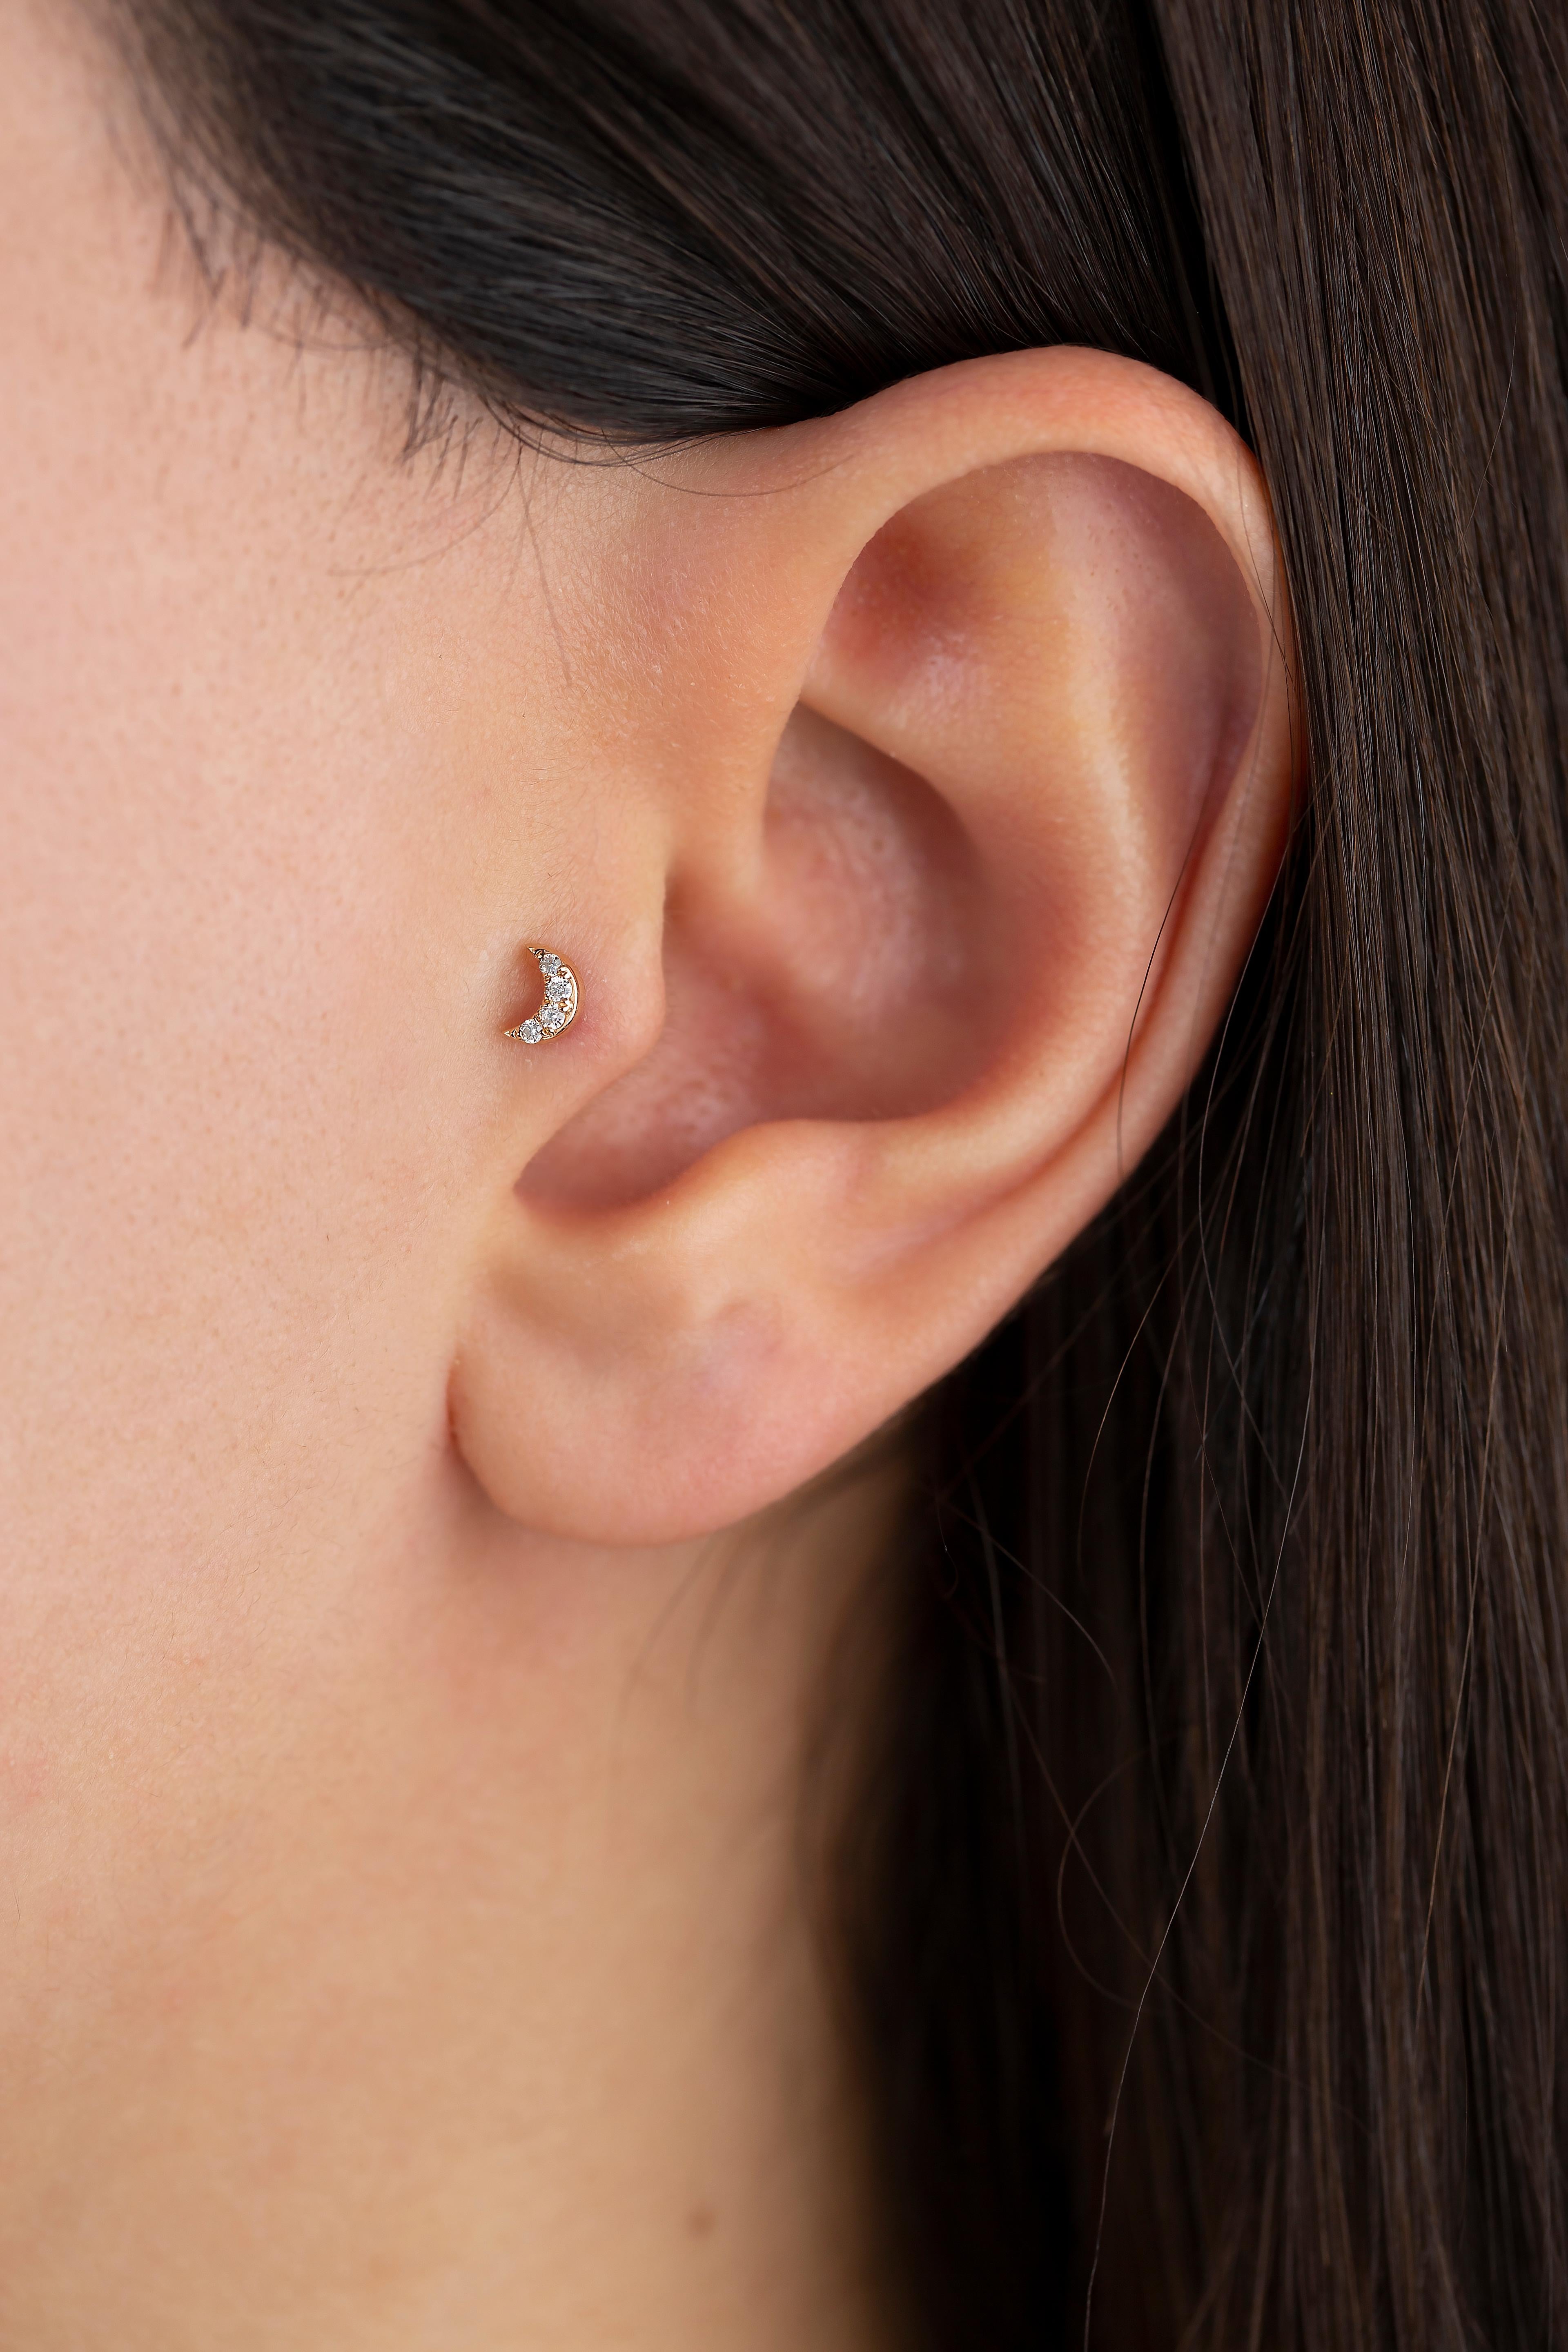 14K Gold 0.13 Ct Diamond Crescent Piercing, Gold Half Moon Diamond Earring

You can use the piercing as an earring too! Also this piercing is suitable for tragus, nose, helix, lobe, flat, medusa, monreo, labret and stud.

This piercing was made with